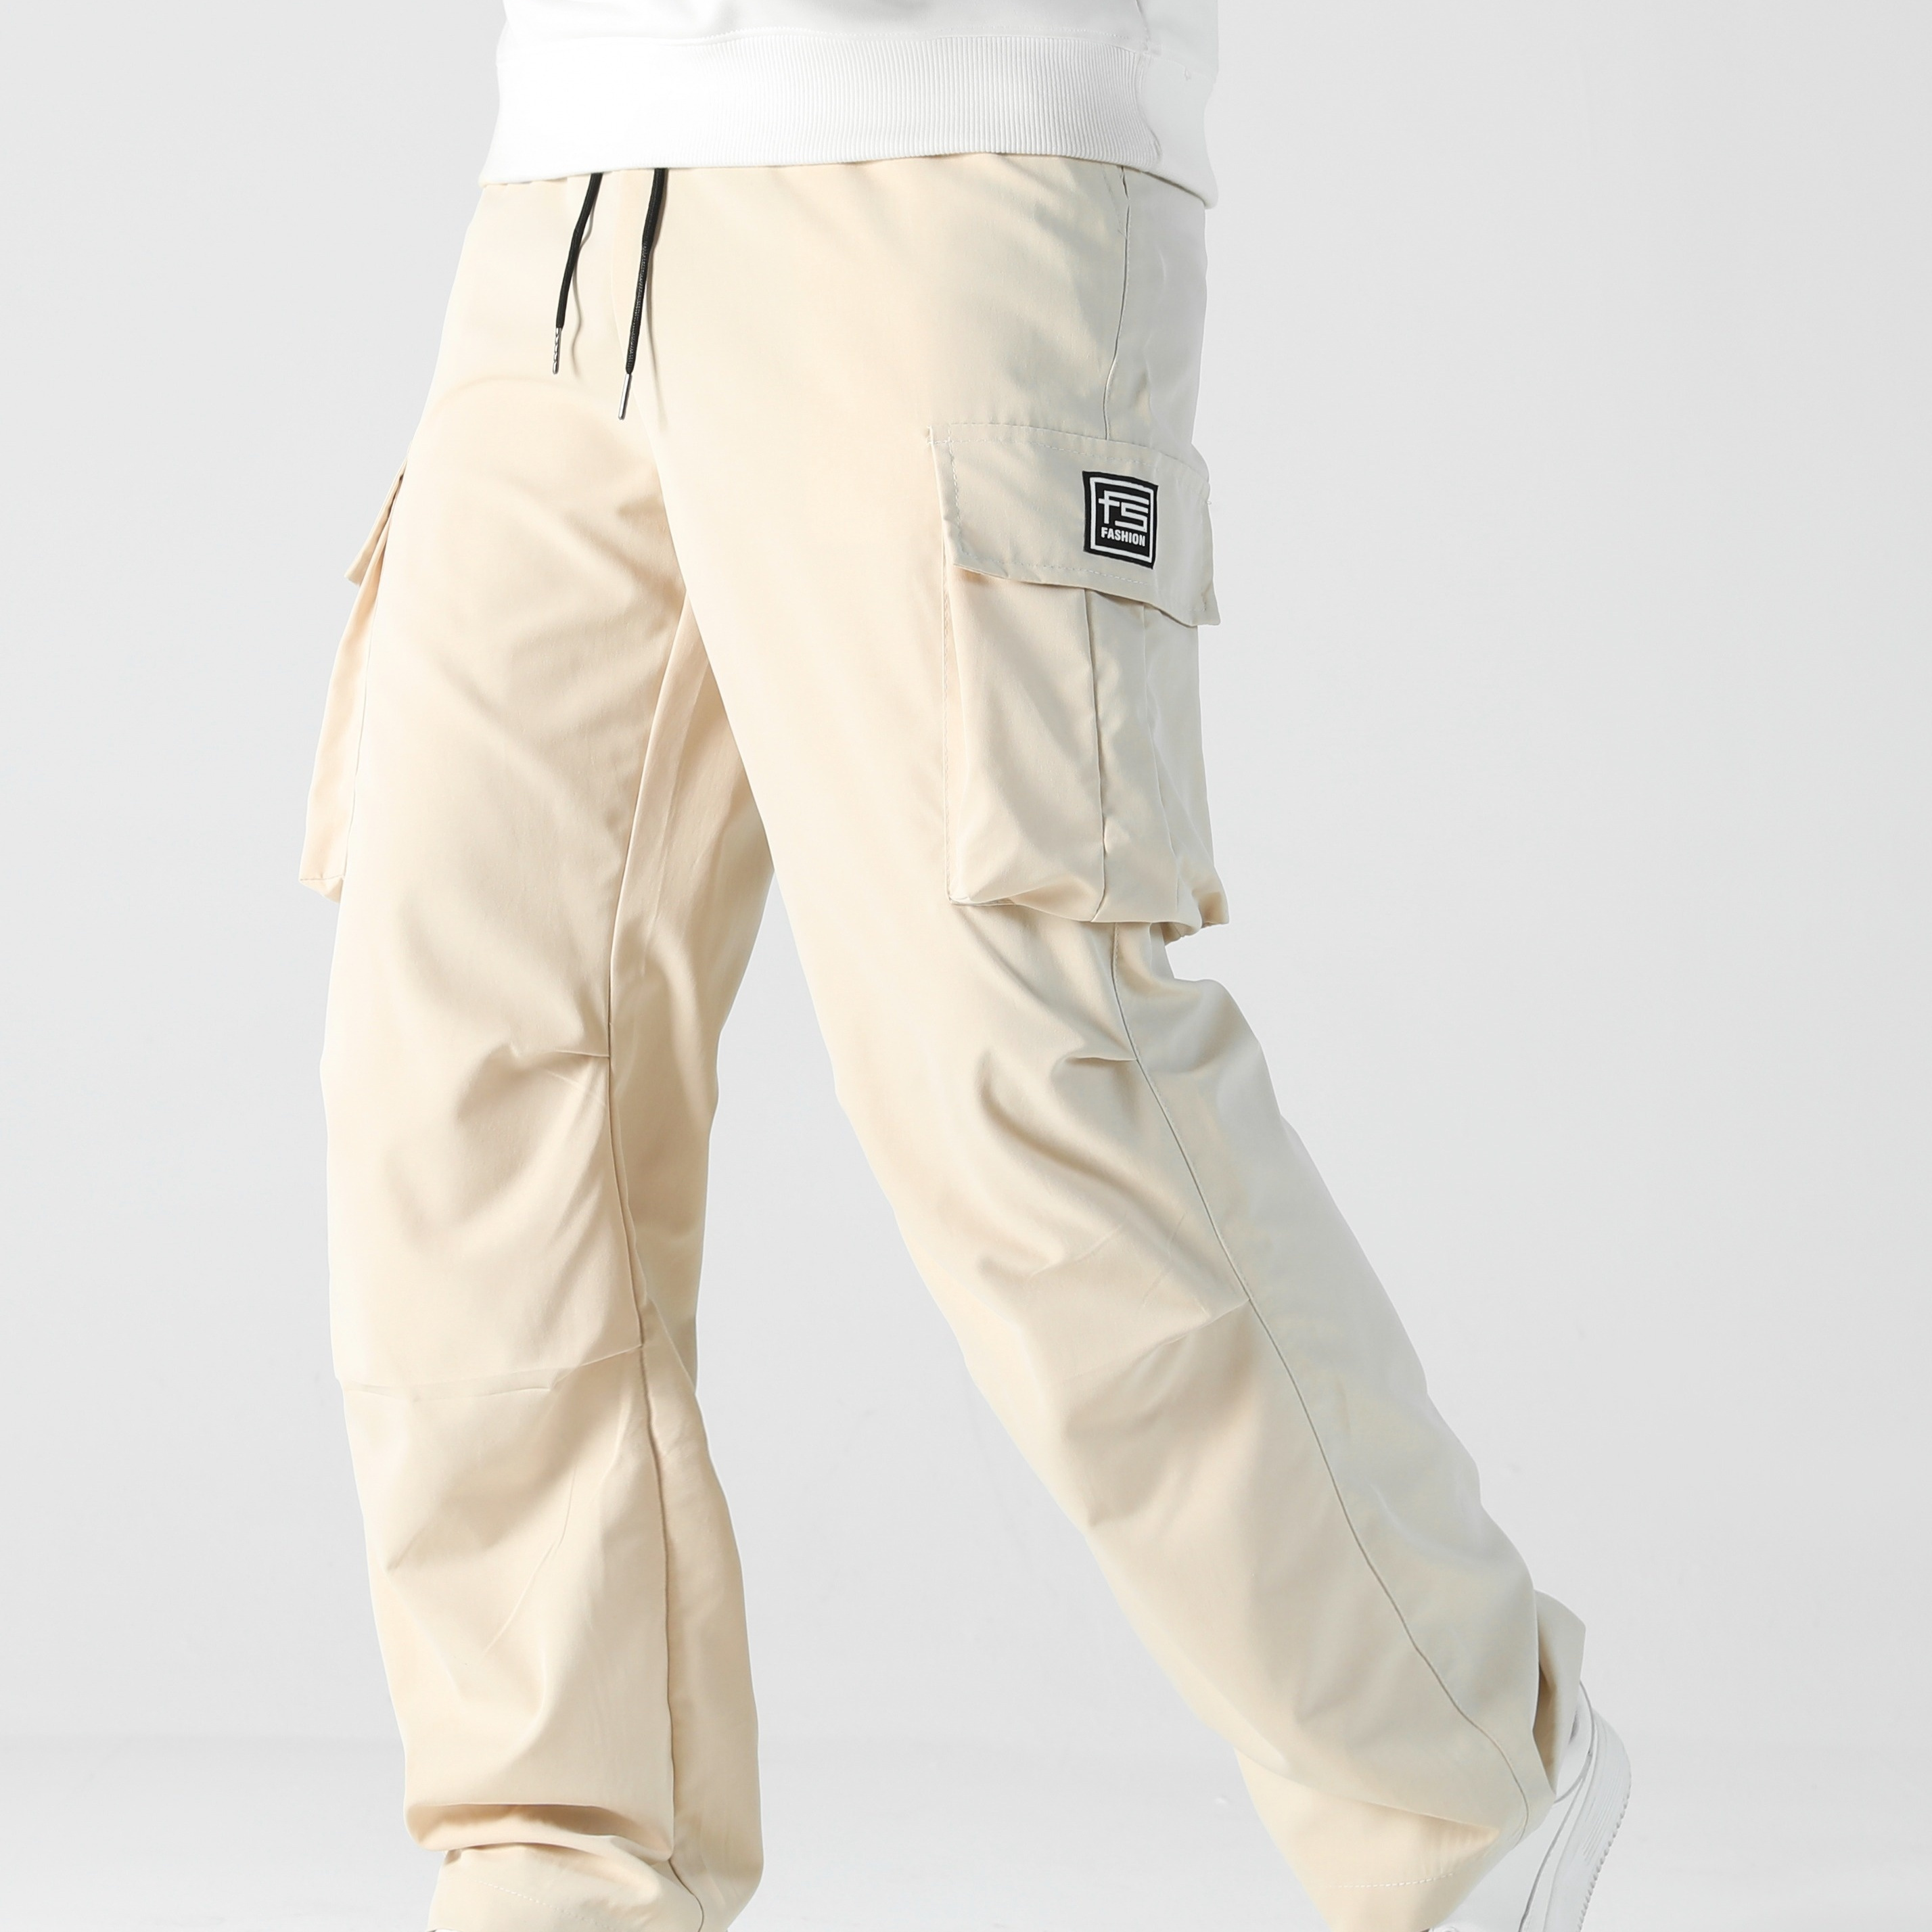 

Men's Letters Pattern Cargo Pants With Multi Pockets, Causal Drawstring Trousers For Outdoor Activities